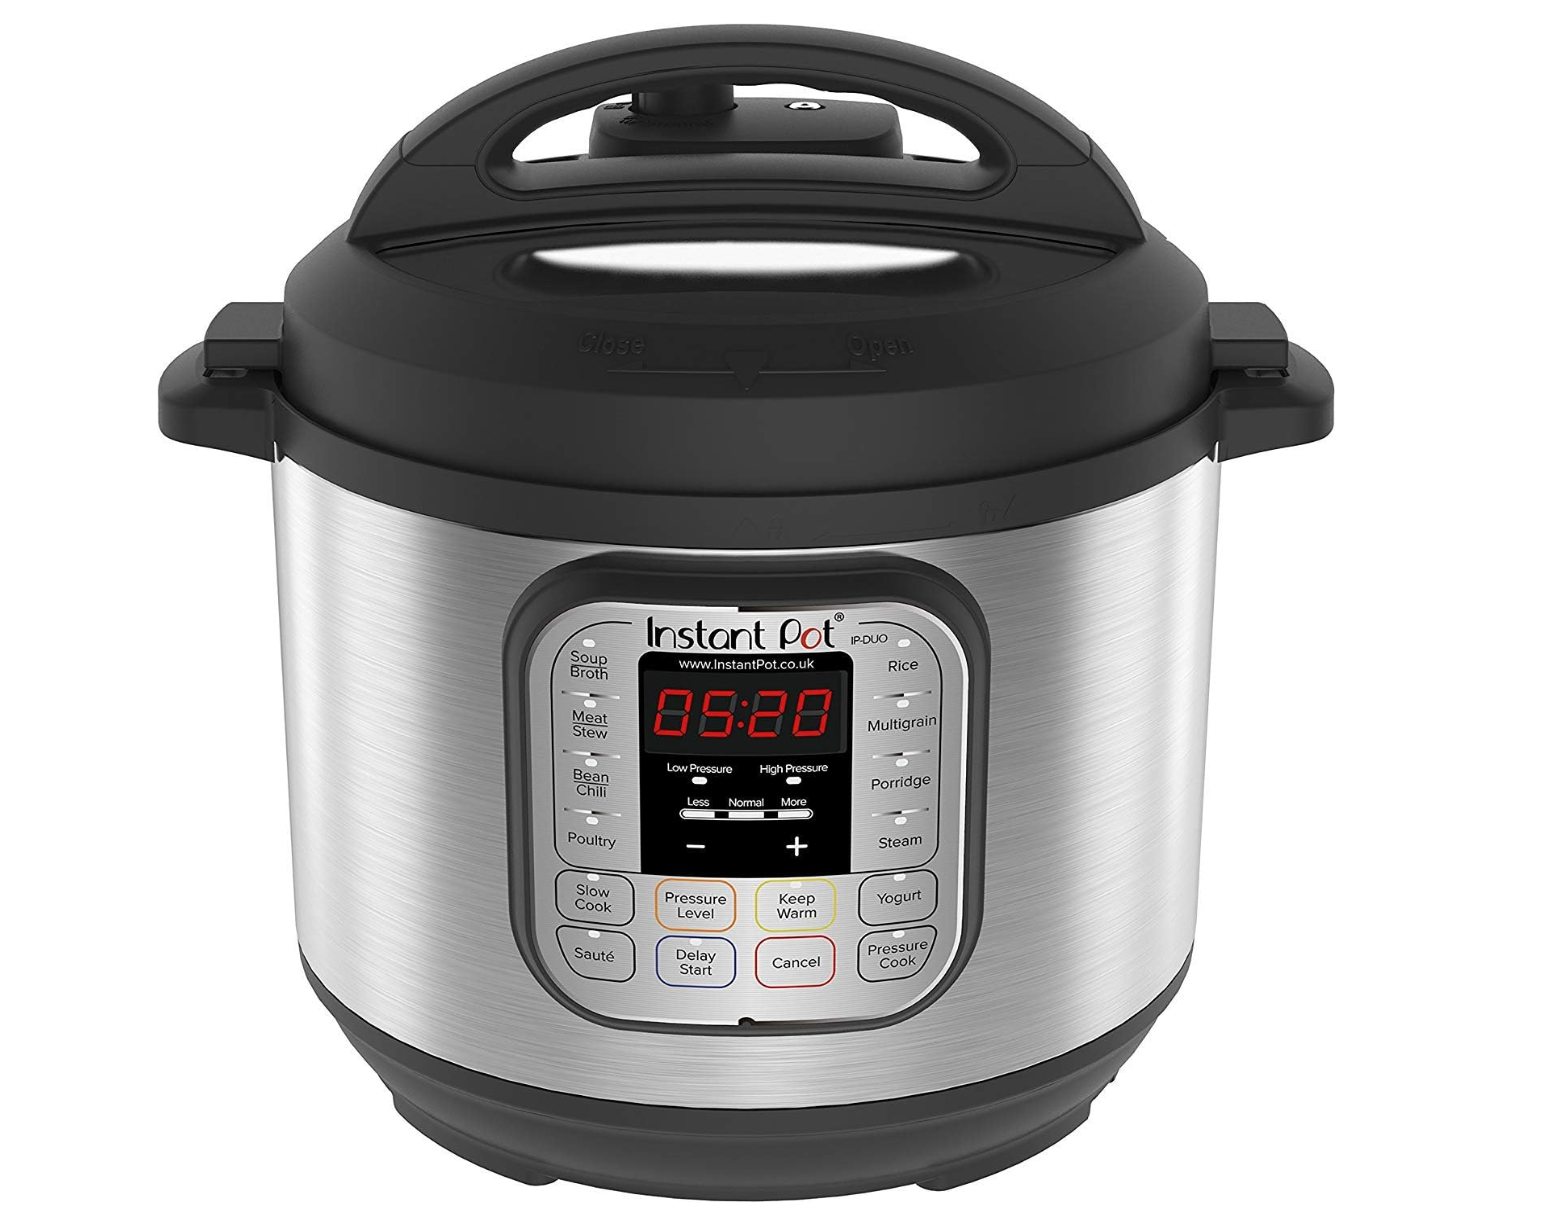 Instant Pot Duo 7-in-1 Electric Pressure Cooker. (PHOTO: Amazon Singapore)